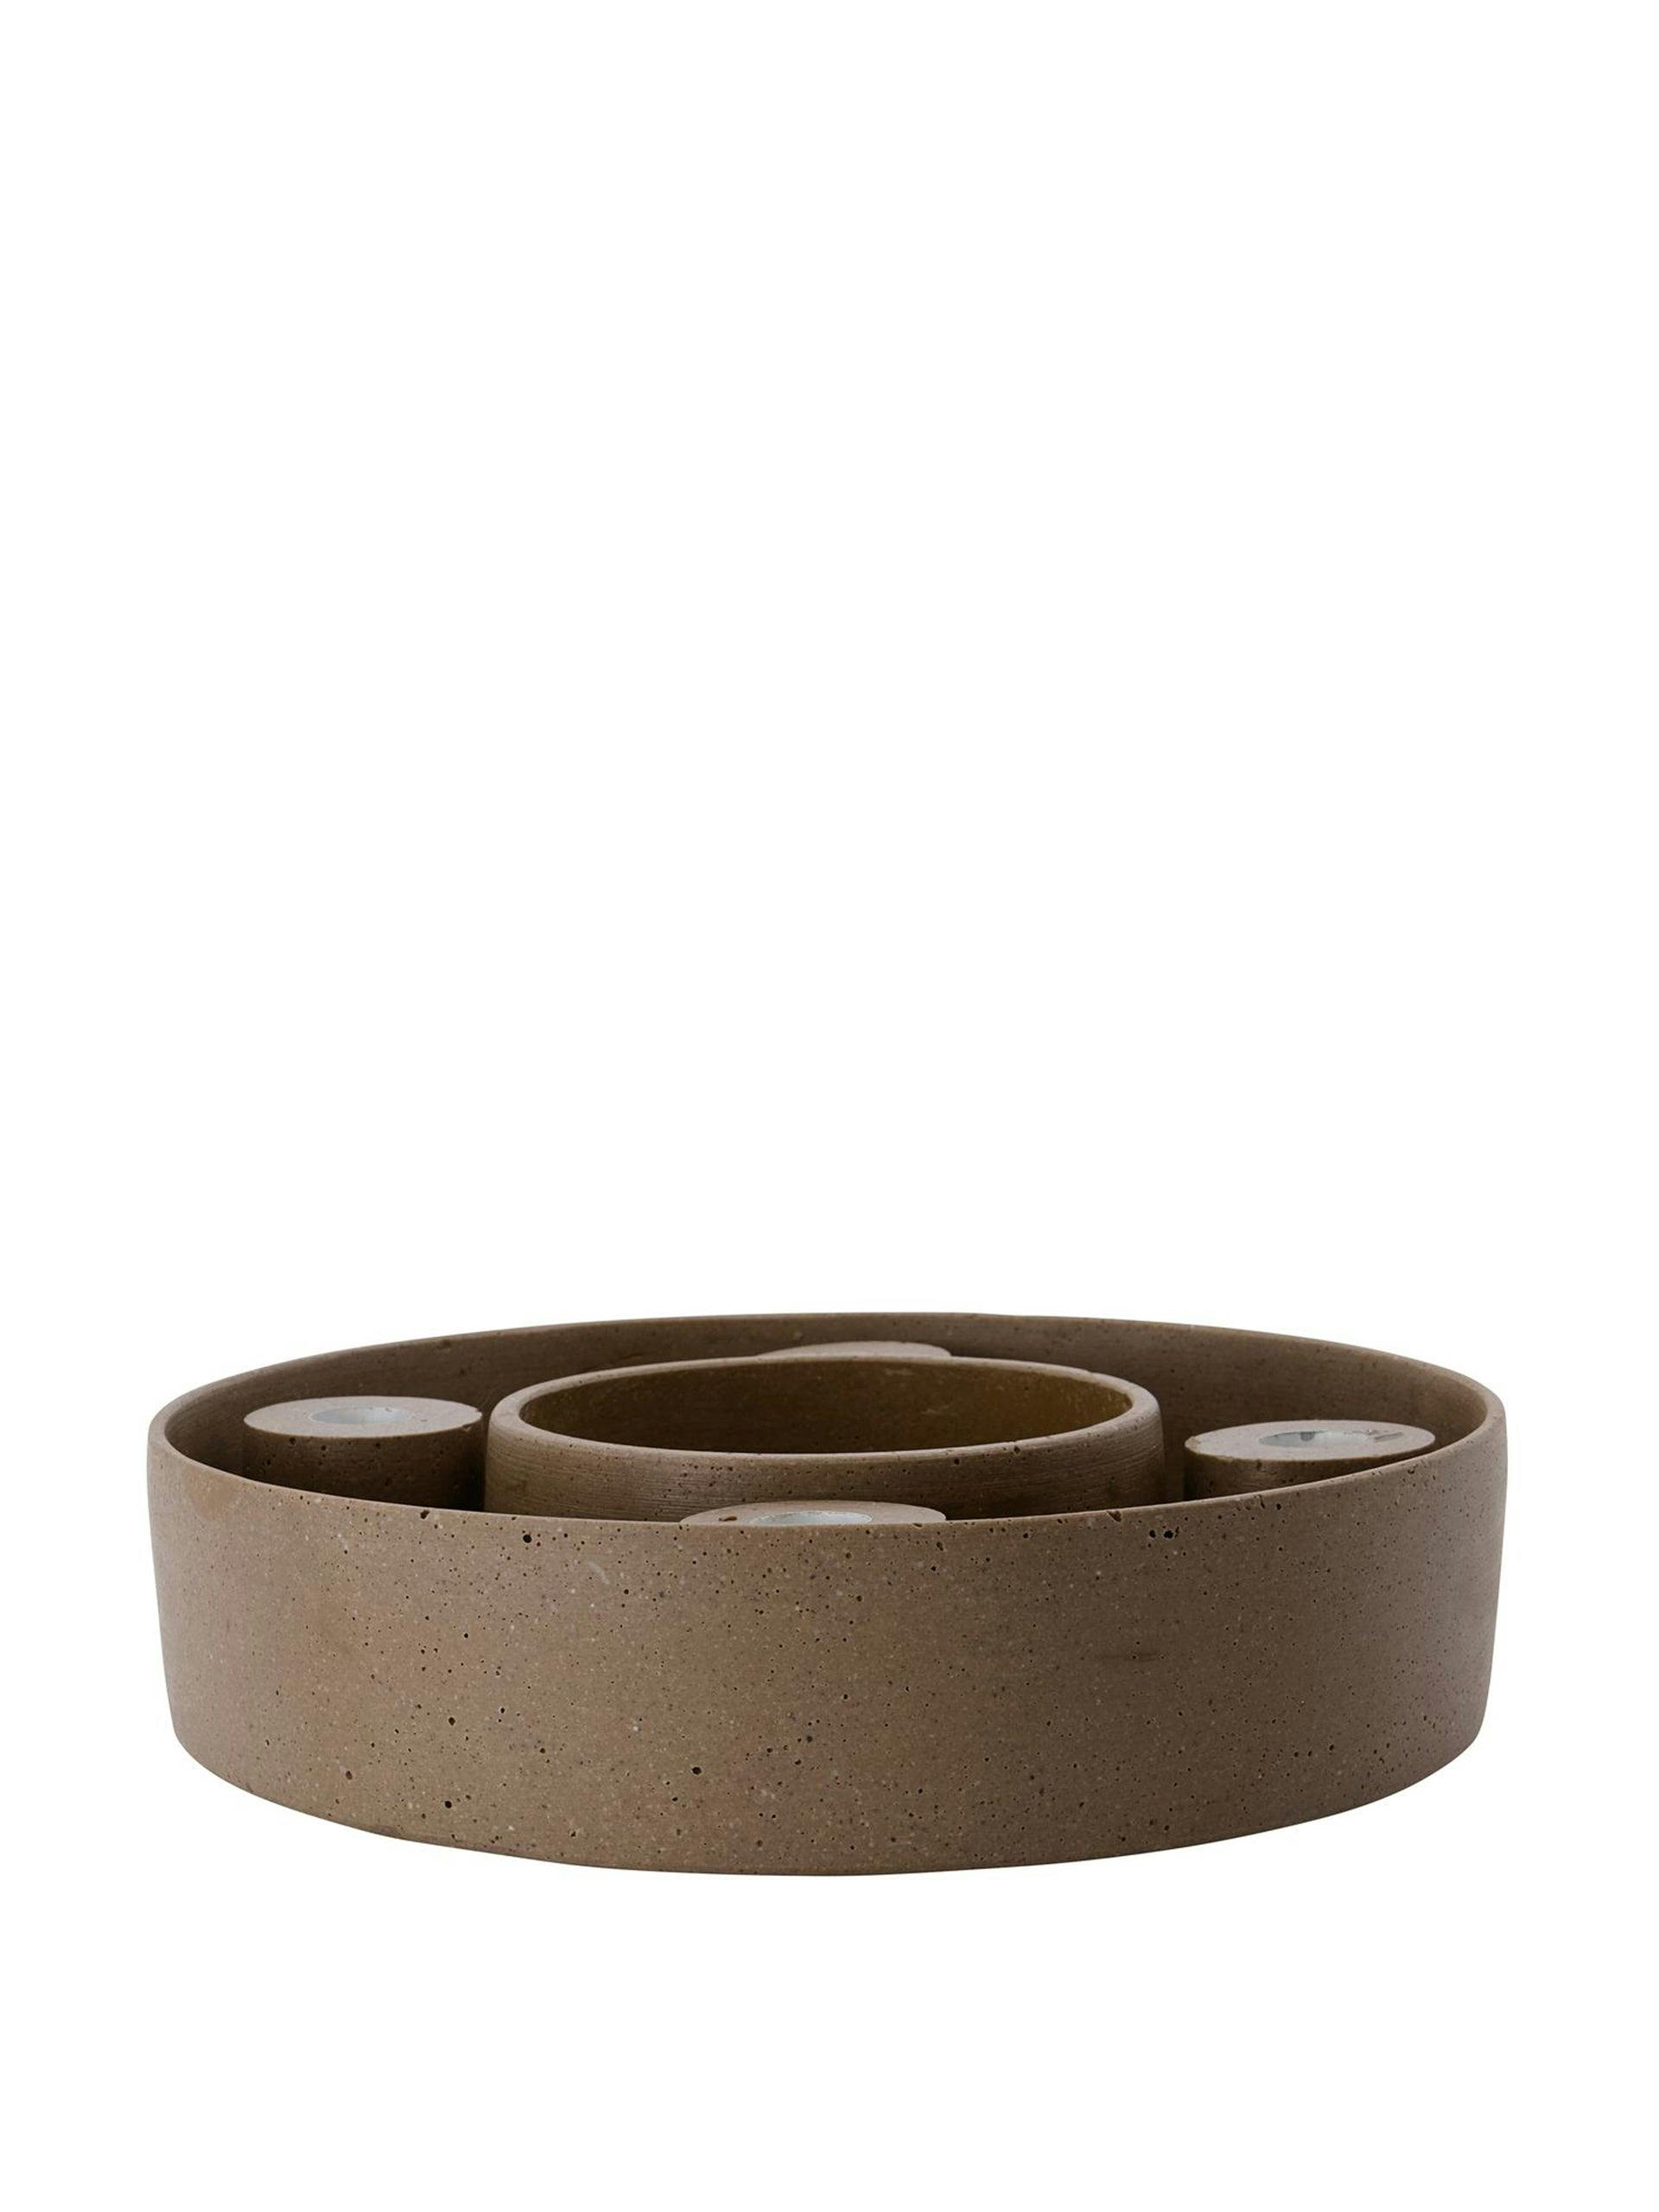 The Ring concrete candle holder